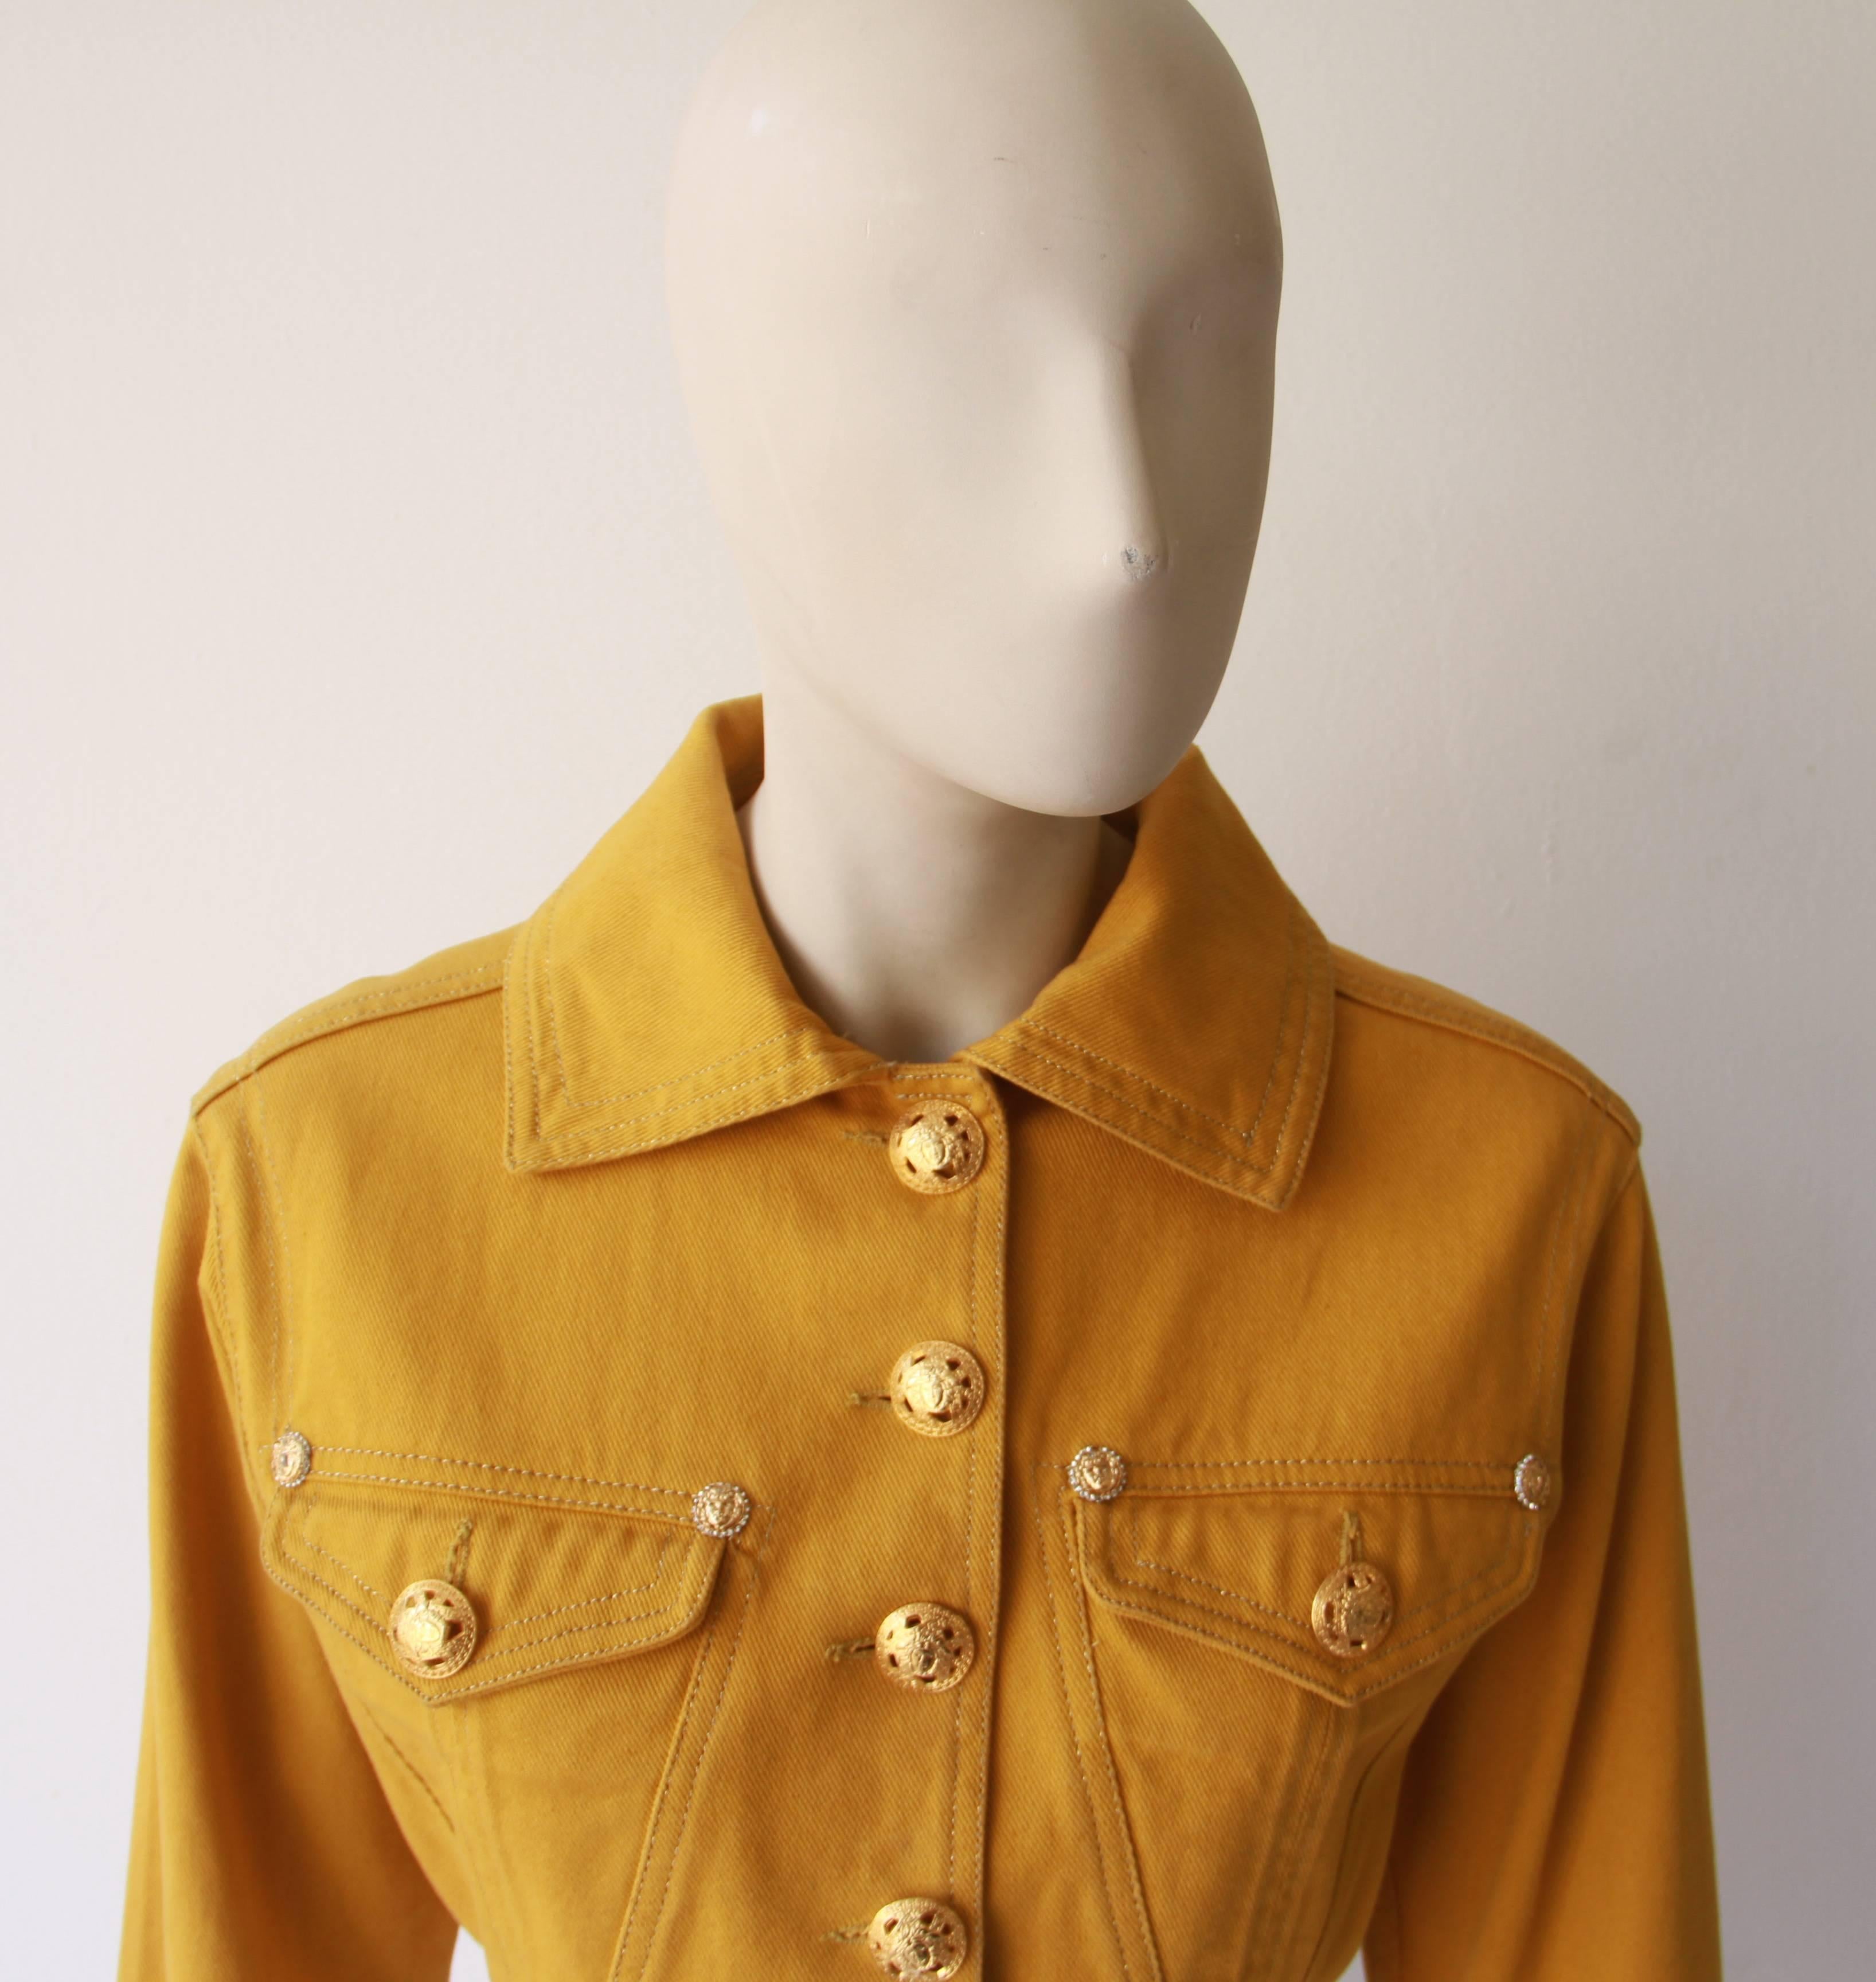 Gianni Versace gold yellow cropped cotton denim jacket from the Fall 1992 Versace Jeans Couture collection. 

The jacket features large gold-tone metal cut-out Medusa embossed buttons and smaller gold-tone metal and paste buttons to the